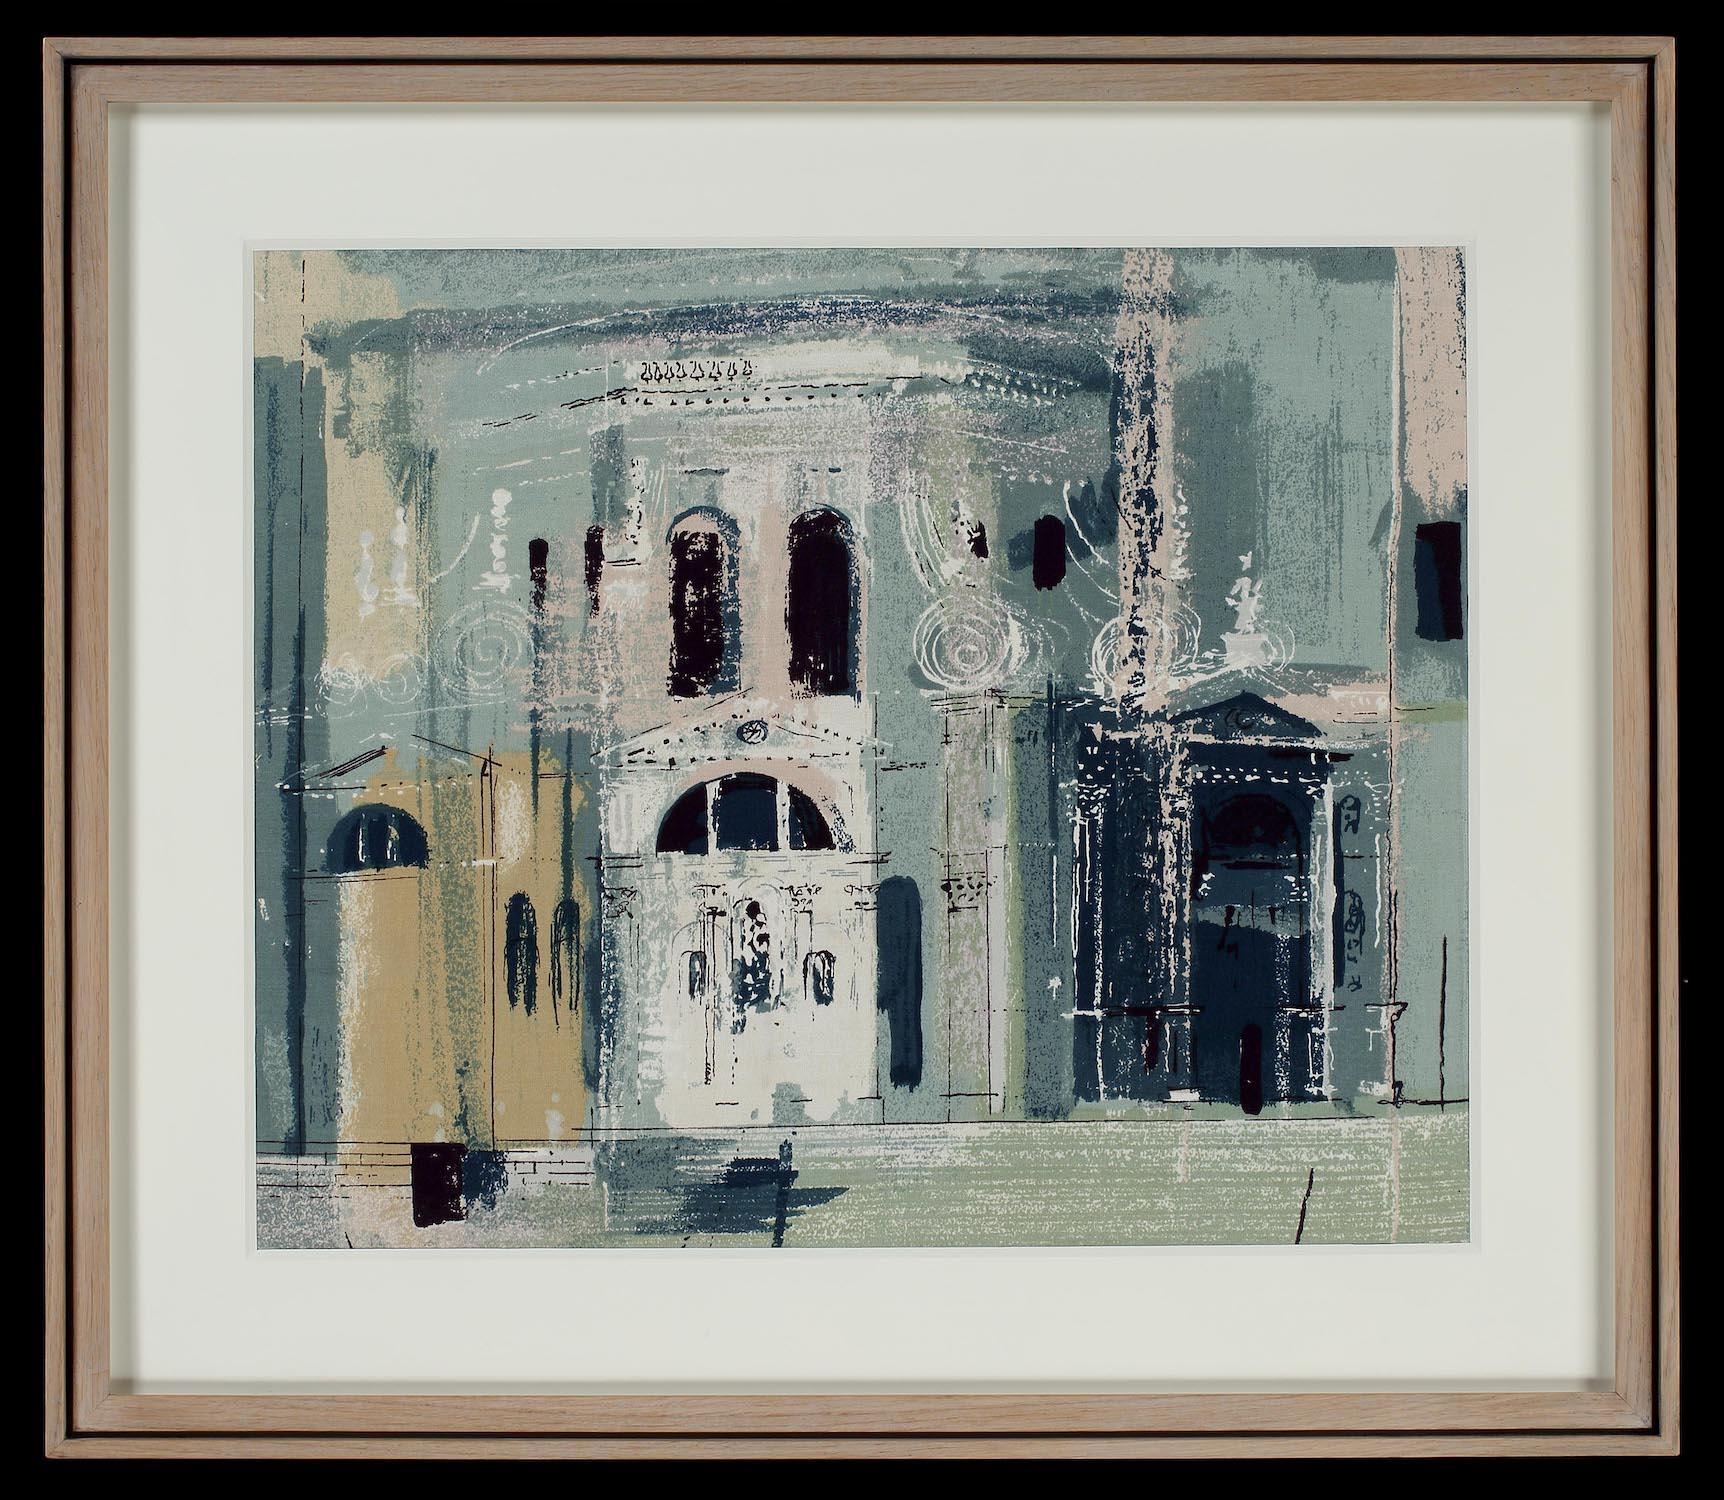 JOHN PIPER CH (BRITISH,1903-1992) :CHIESA DELLA SALUTE, VENICE Screenprinted fabric, printed by Sandersons, 1959
 In the late 1950's to the early 60's there was interest in painterly textiles that demonstrated the unique potential of screen